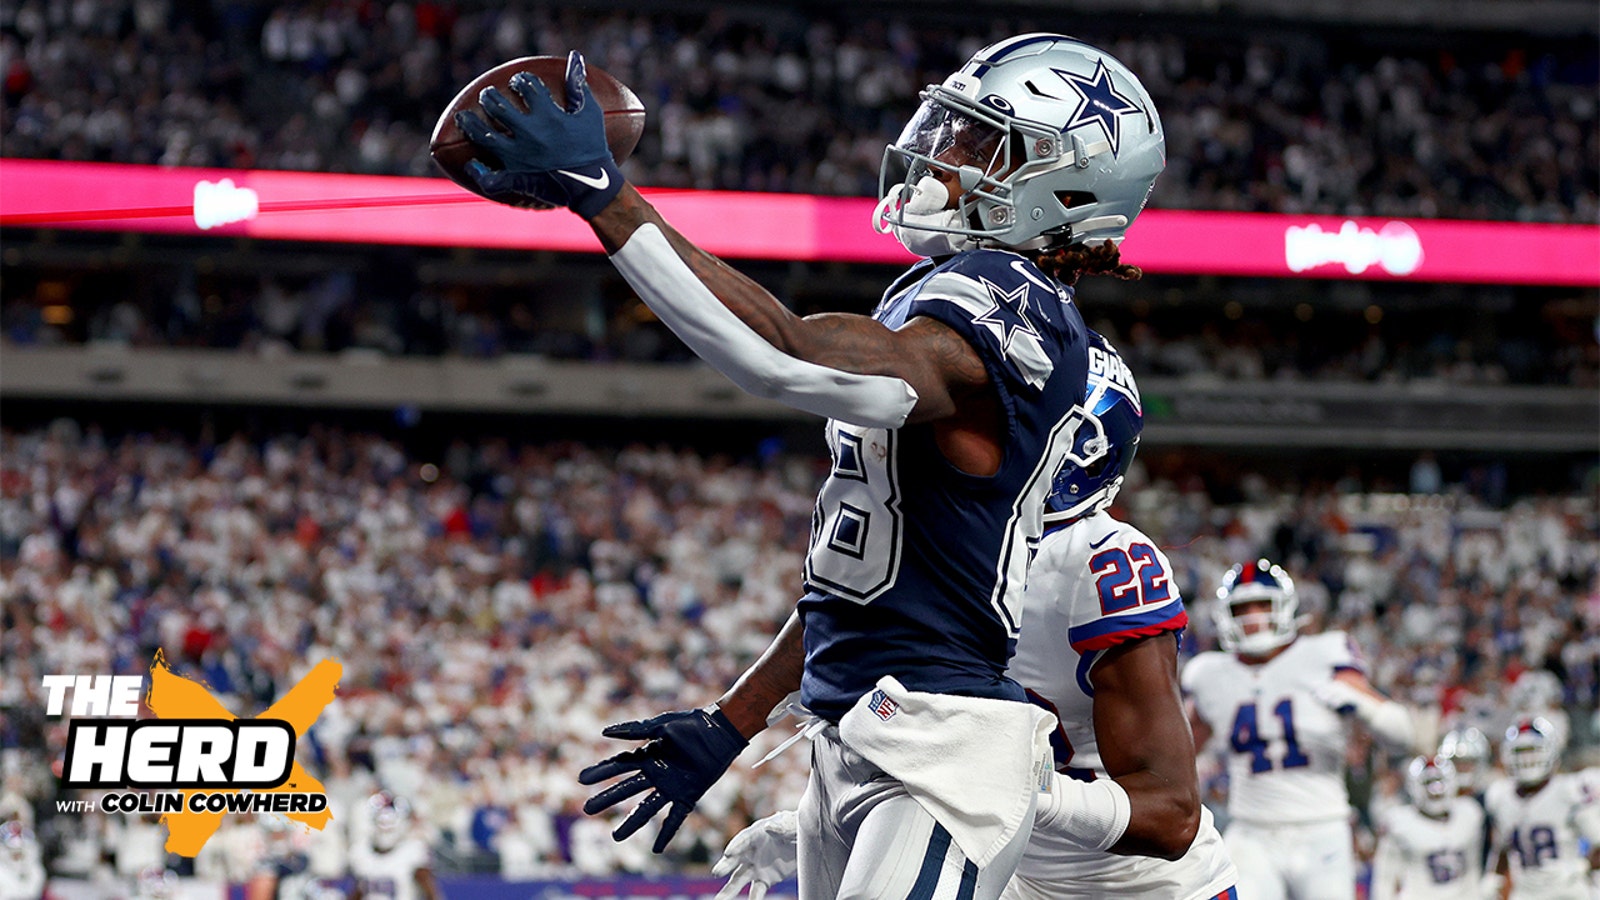 Are Cowboys legit after back-to-back wins?